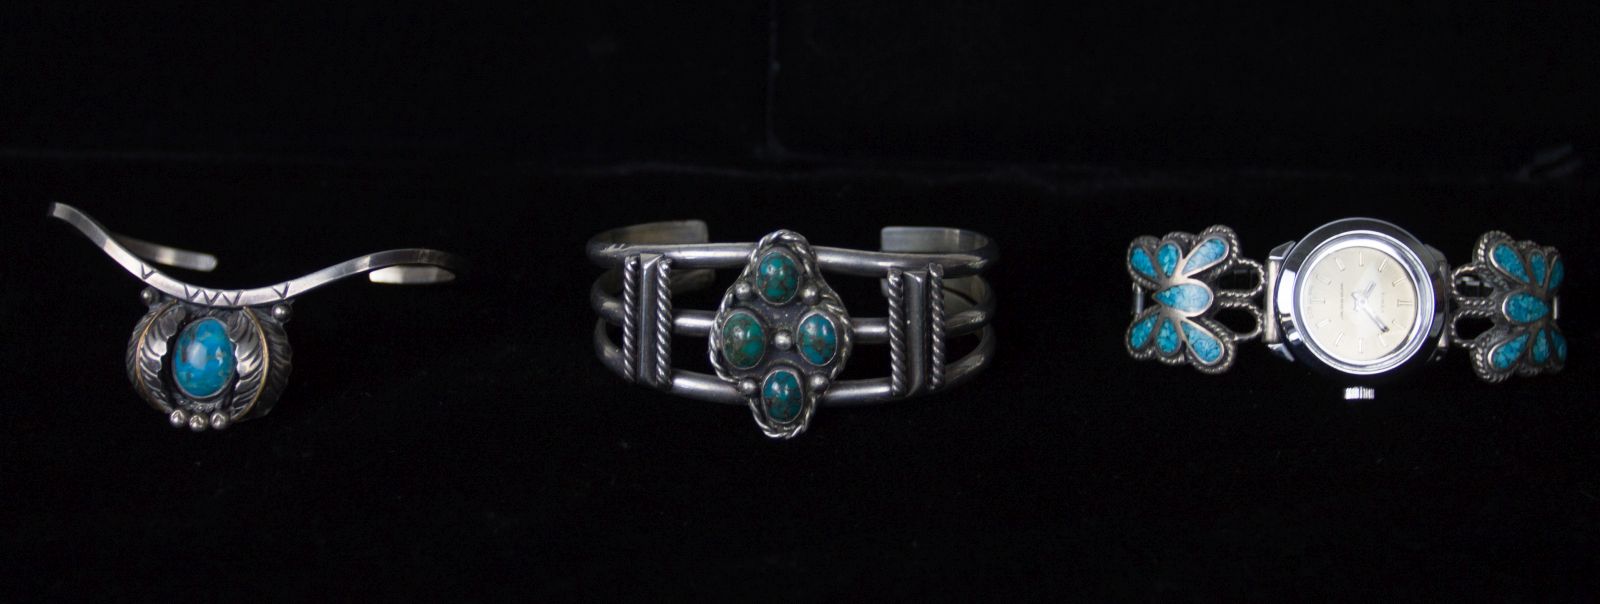 NAVAJO STERLING SILVER BRACELETS WITH TURQUOISE  